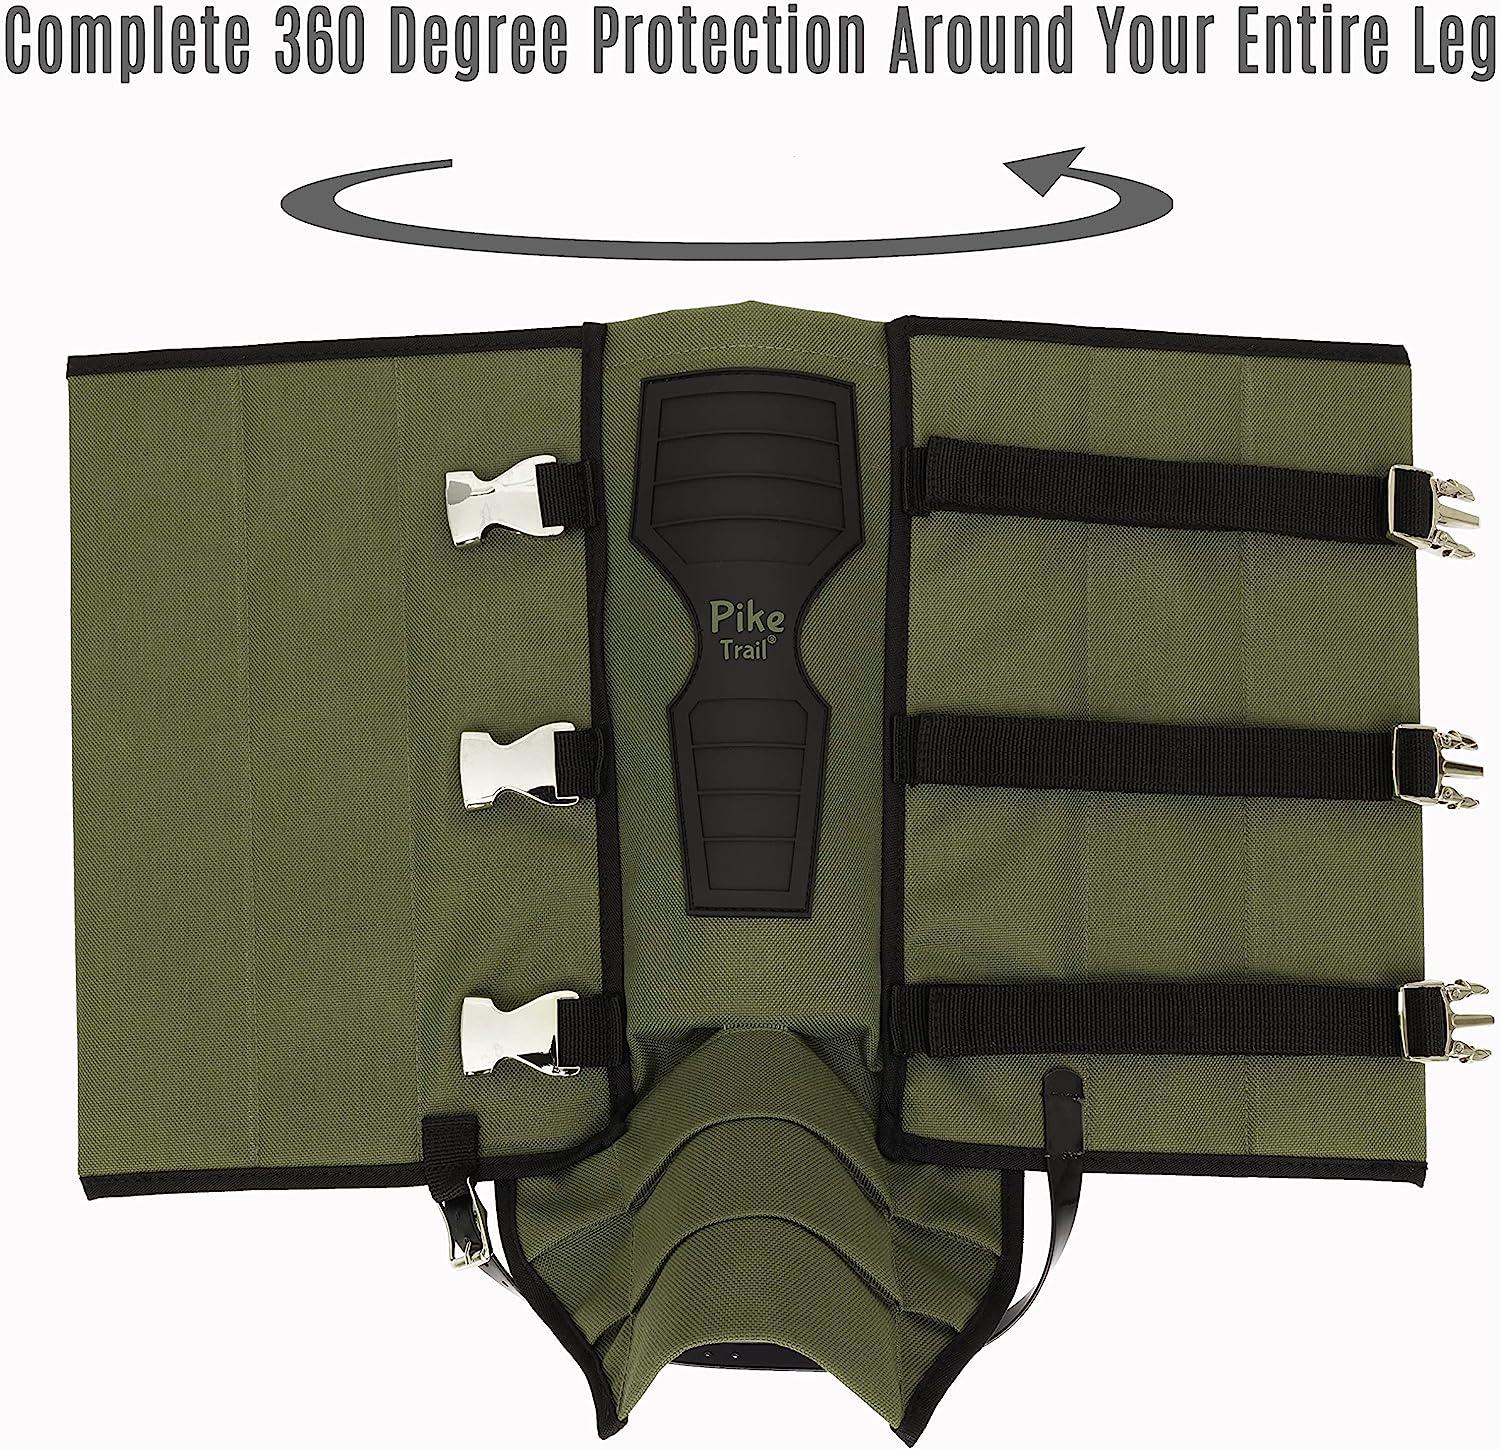 Pike Trail Snake Gaiters Leg Guards for Snake Bite Protection Olive Drab